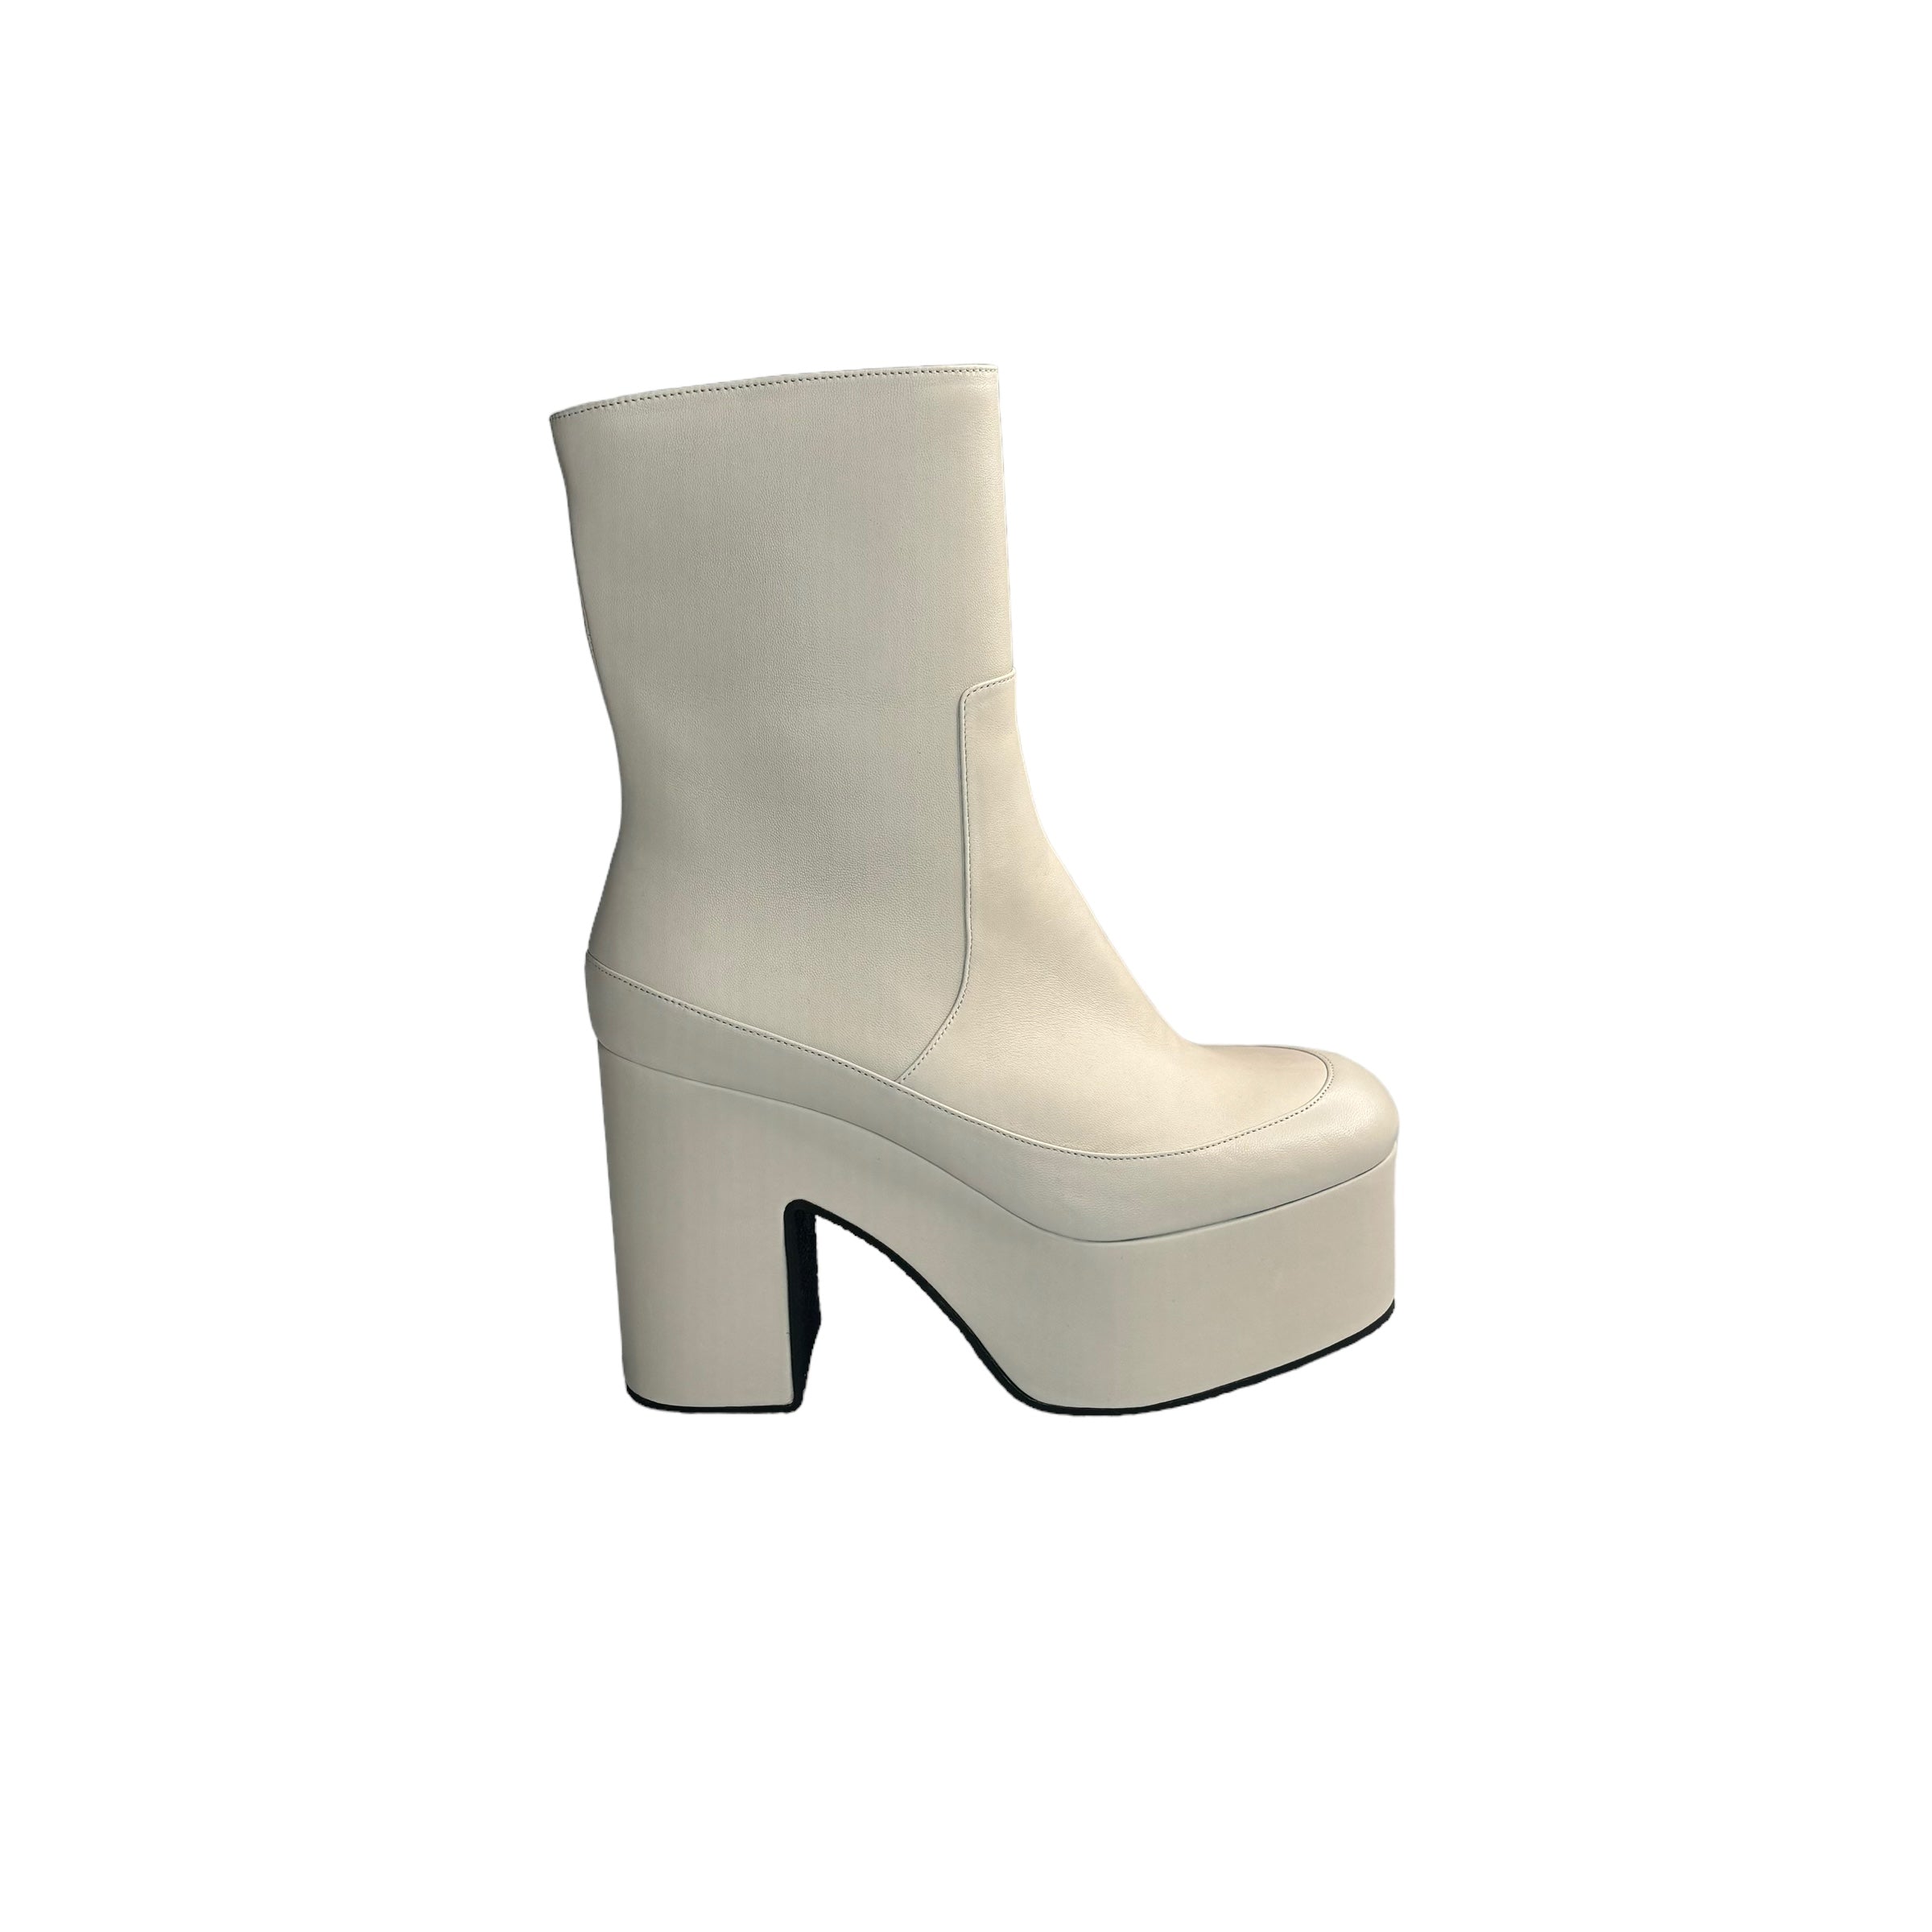 DRIES VAN NOTEN White Leather Platform Heeled Ankle Boots